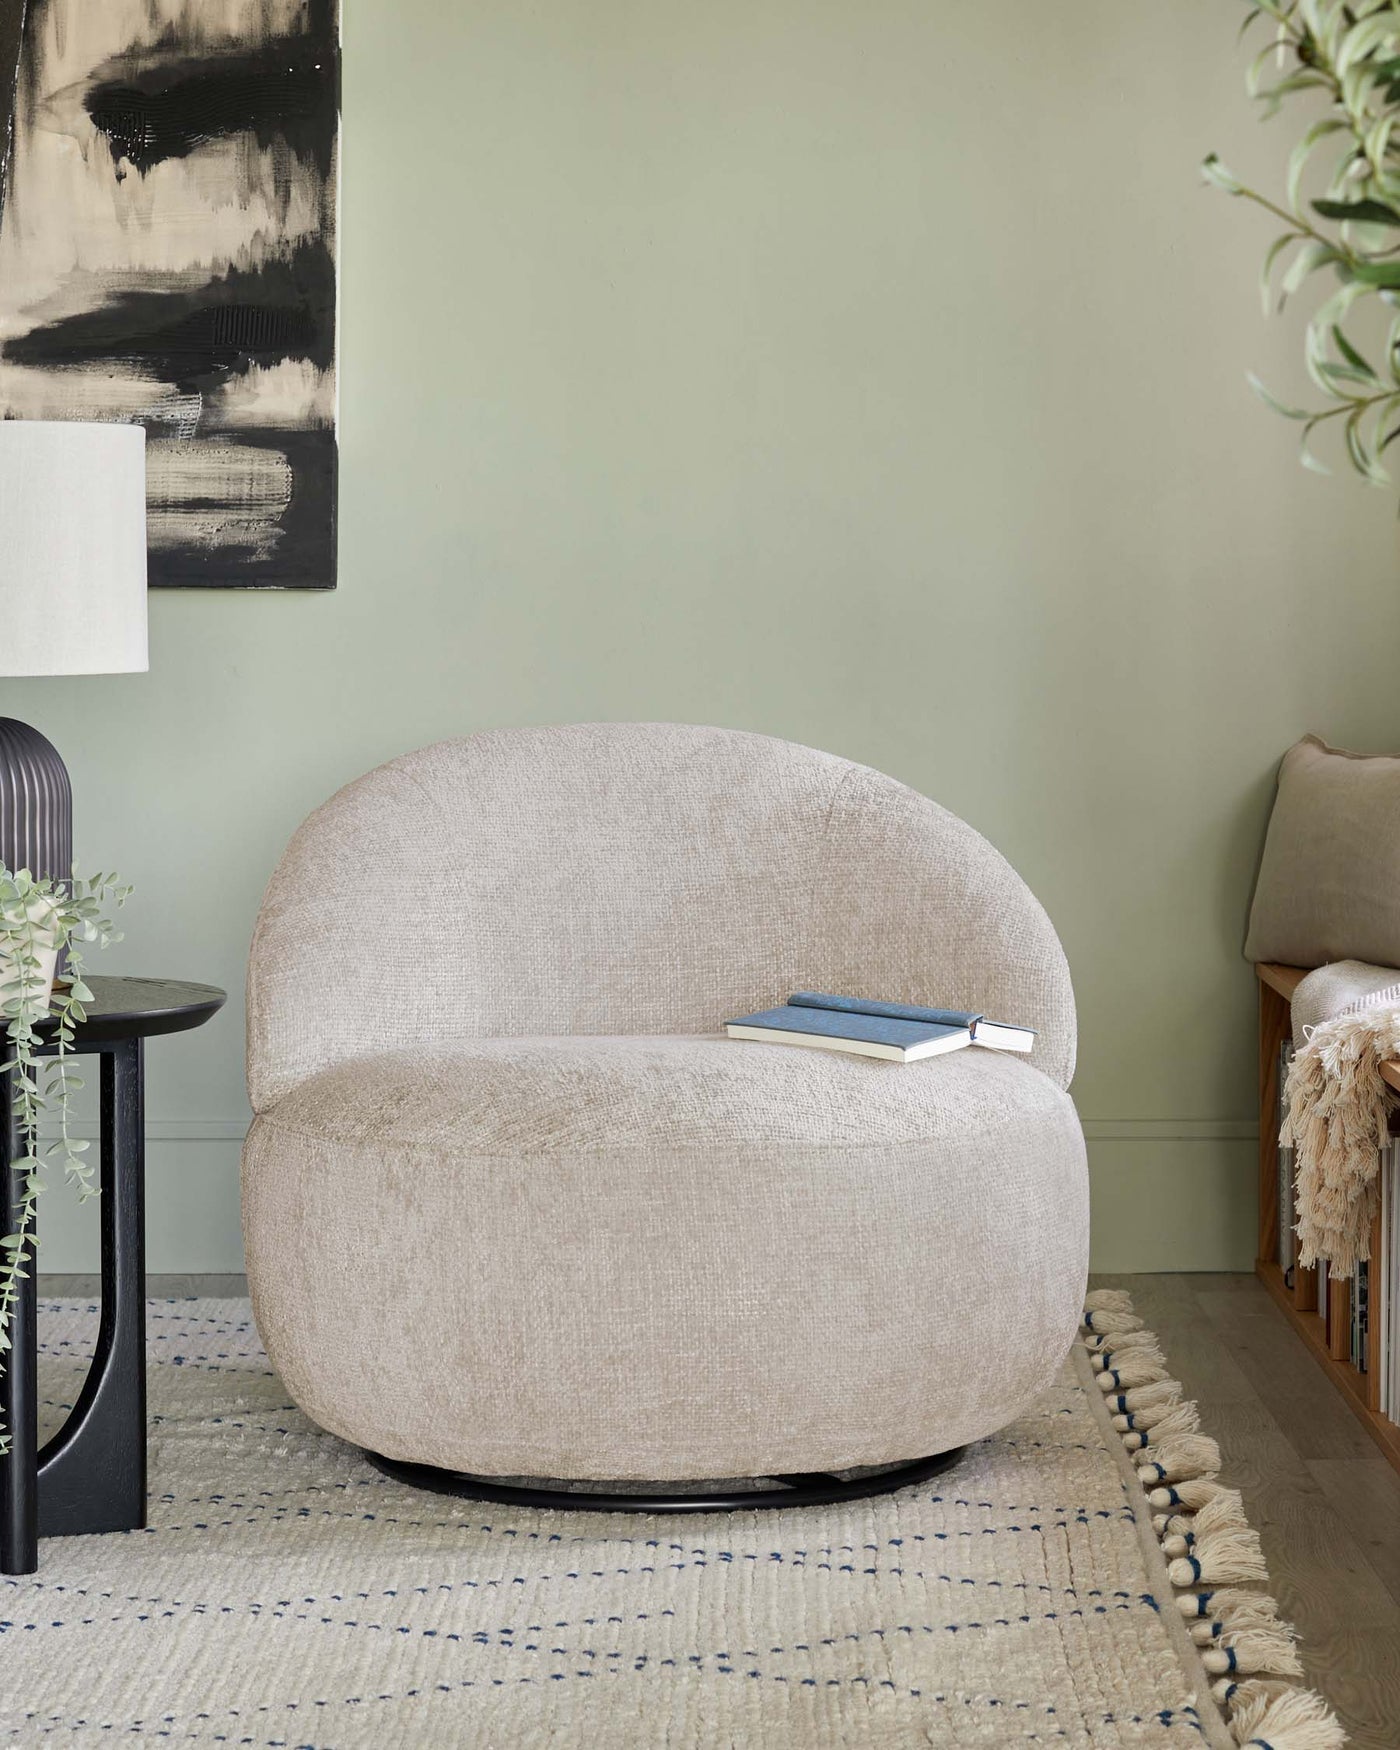 Contemporary beige fabric bouclé accent chair with a rounded, cosy shape, standing on a minimalist black base. Beside it is a small matte black round side table. The room features a woven area rug with tassel details and a cream throw blanket on a wooden bench in the background, creating a warm and inviting space.